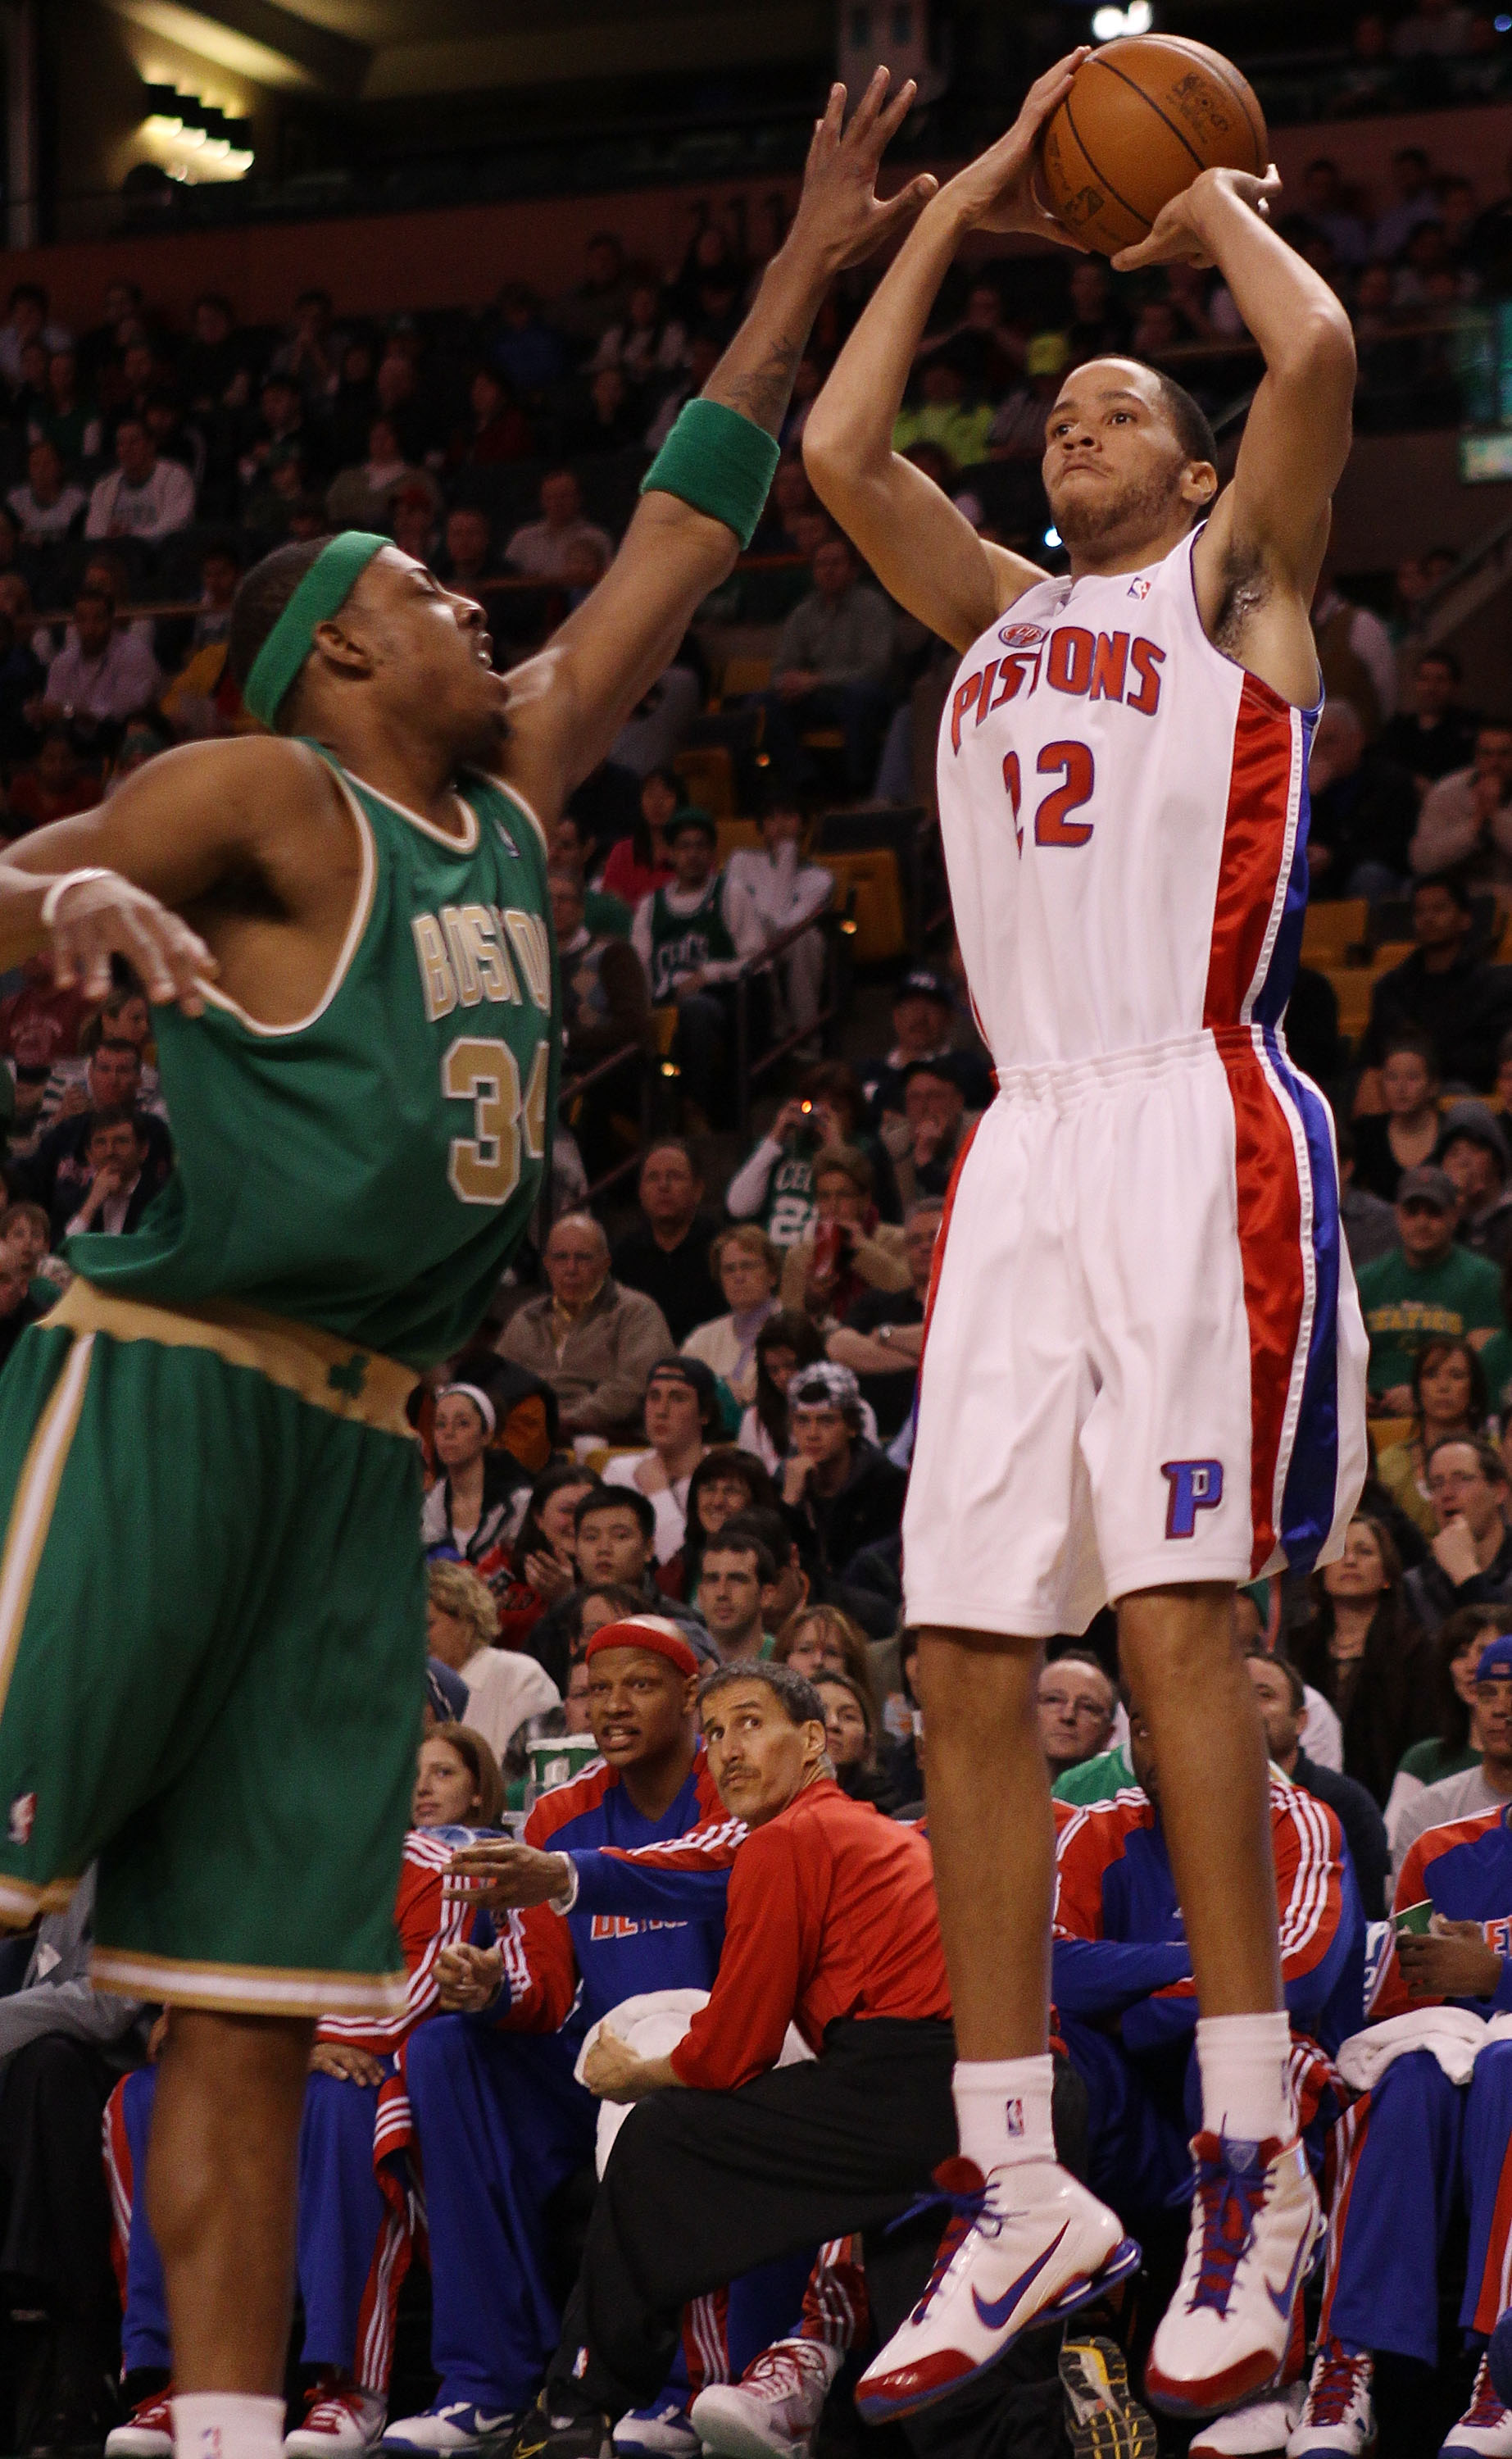 BOSTON - MARCH 15:  Tayshaun Prince #22 of the Detroit Pistons takes a shot as Paul Pierce #34 of the Boston Celtics defends on March 15, 2010 at the TD Garden in Boston, Massachusetts.  NOTE TO USER: User expressly acknowledges and agrees that, by downlo